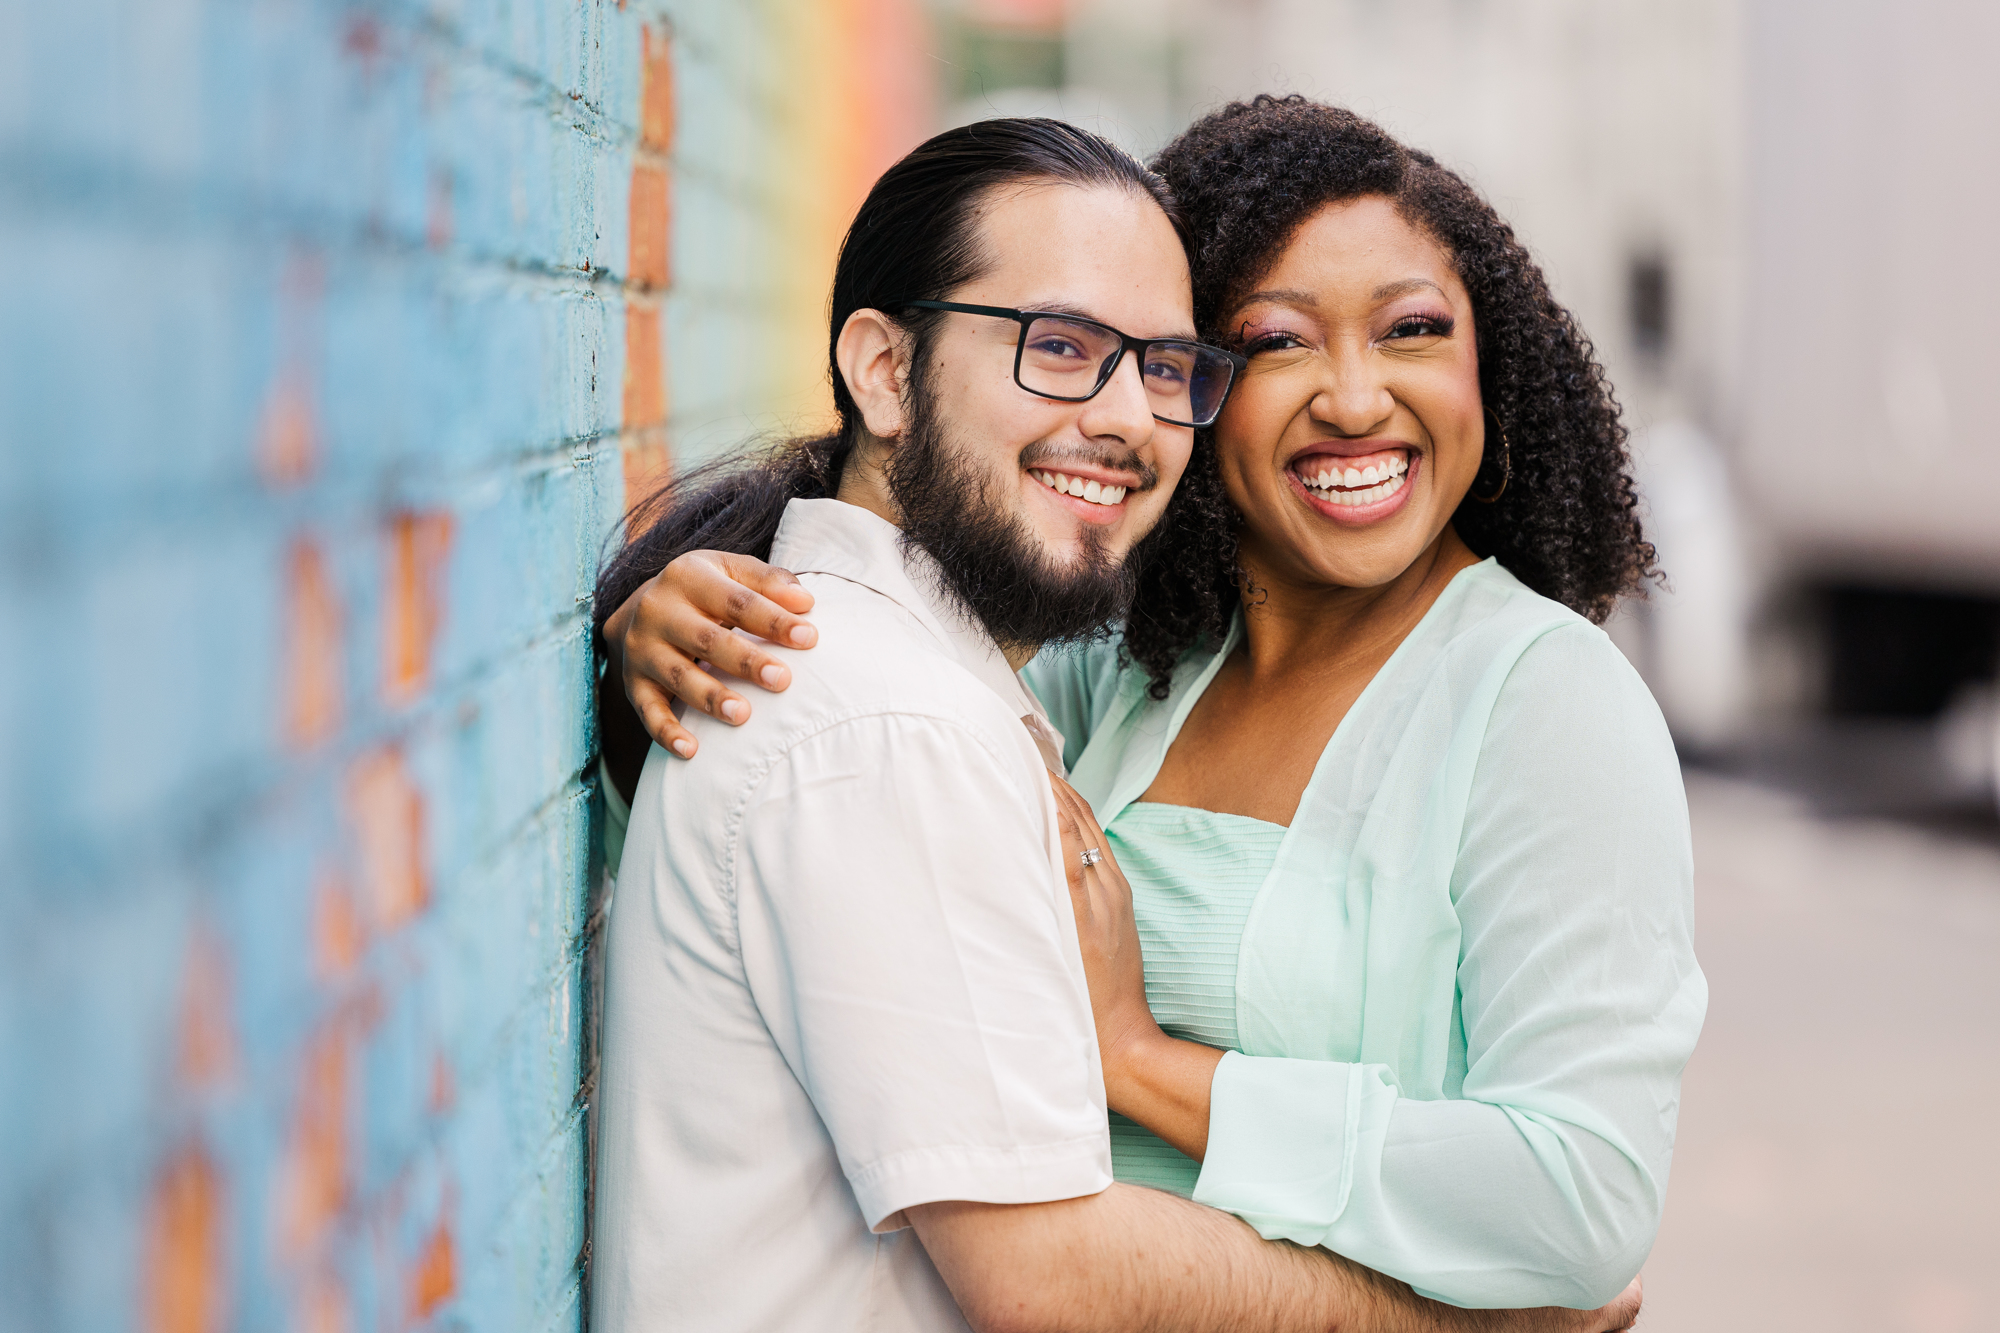 Candid Summer Engagement Photo Shoot in New York